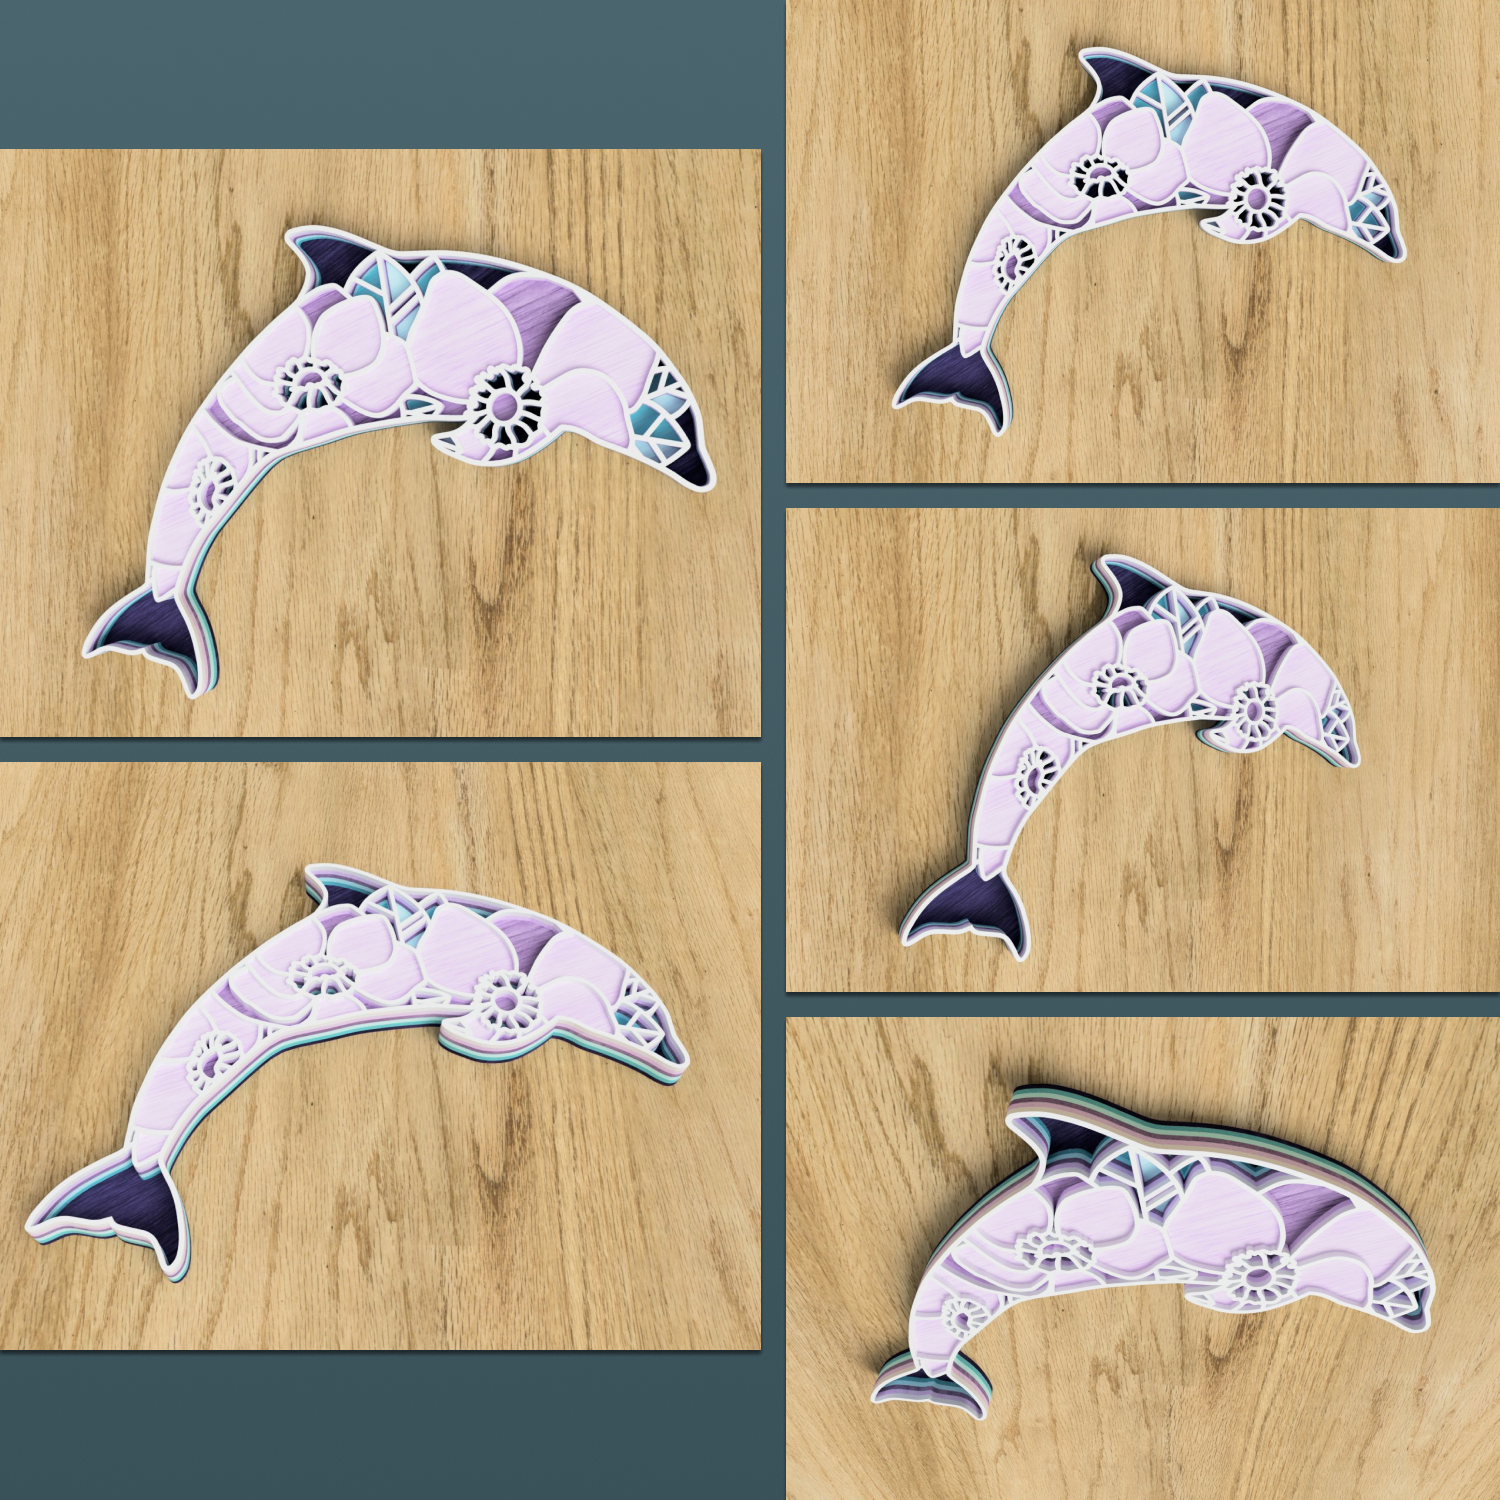 Four pictures of a dolphin on a wooden surface.